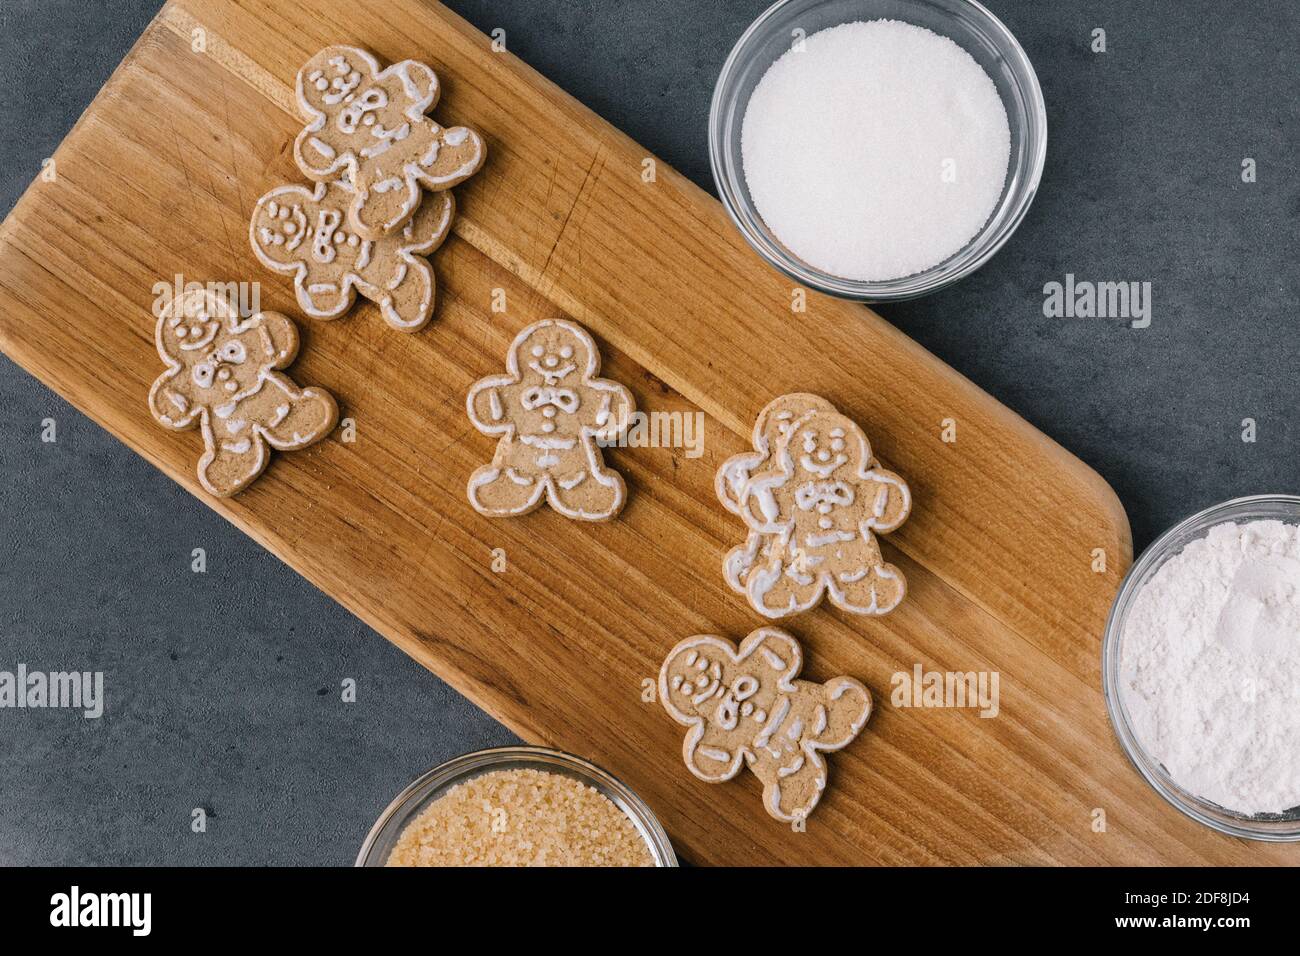 Christmas Gingerbread Man Cookies on Wooden Board With Sugar On Dark Slate Texture Stock Photo